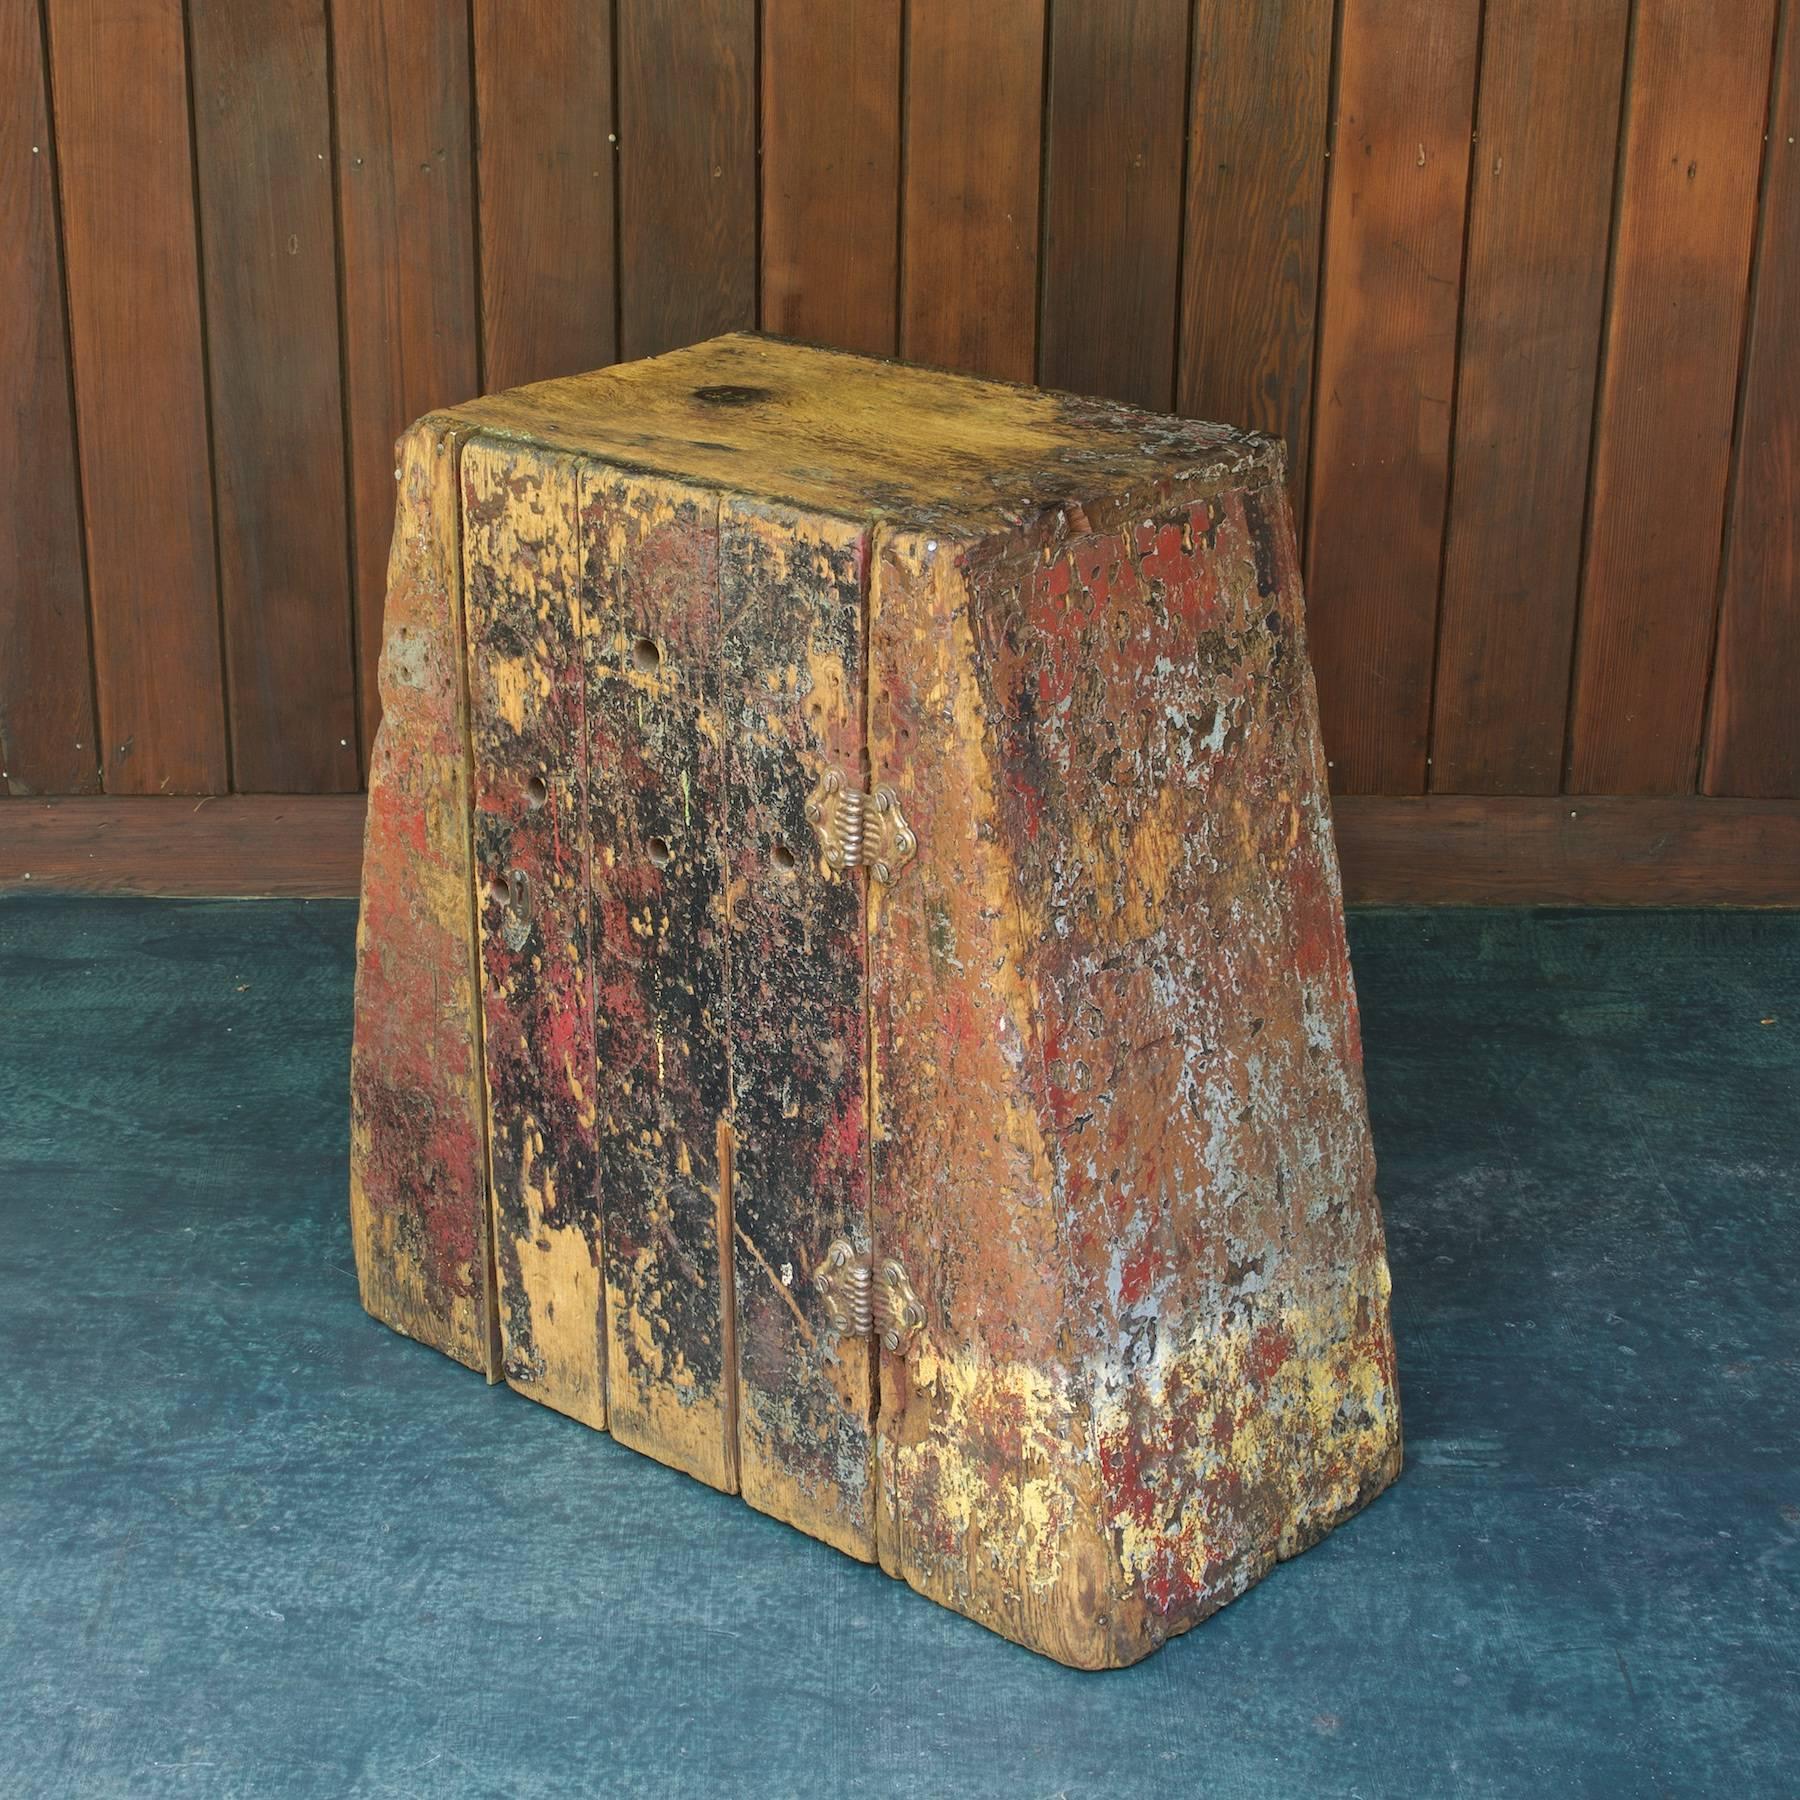 Heavily worn patina to old growth pinewood. Triangular shape, two interior shelves. Strong, sturdy, fully functional cabinet/cubby. Many original square nails visible, as well as others.

Top W: 20.5 / Bottom W: 31 x D: 14 x H: 29.5 in.
 